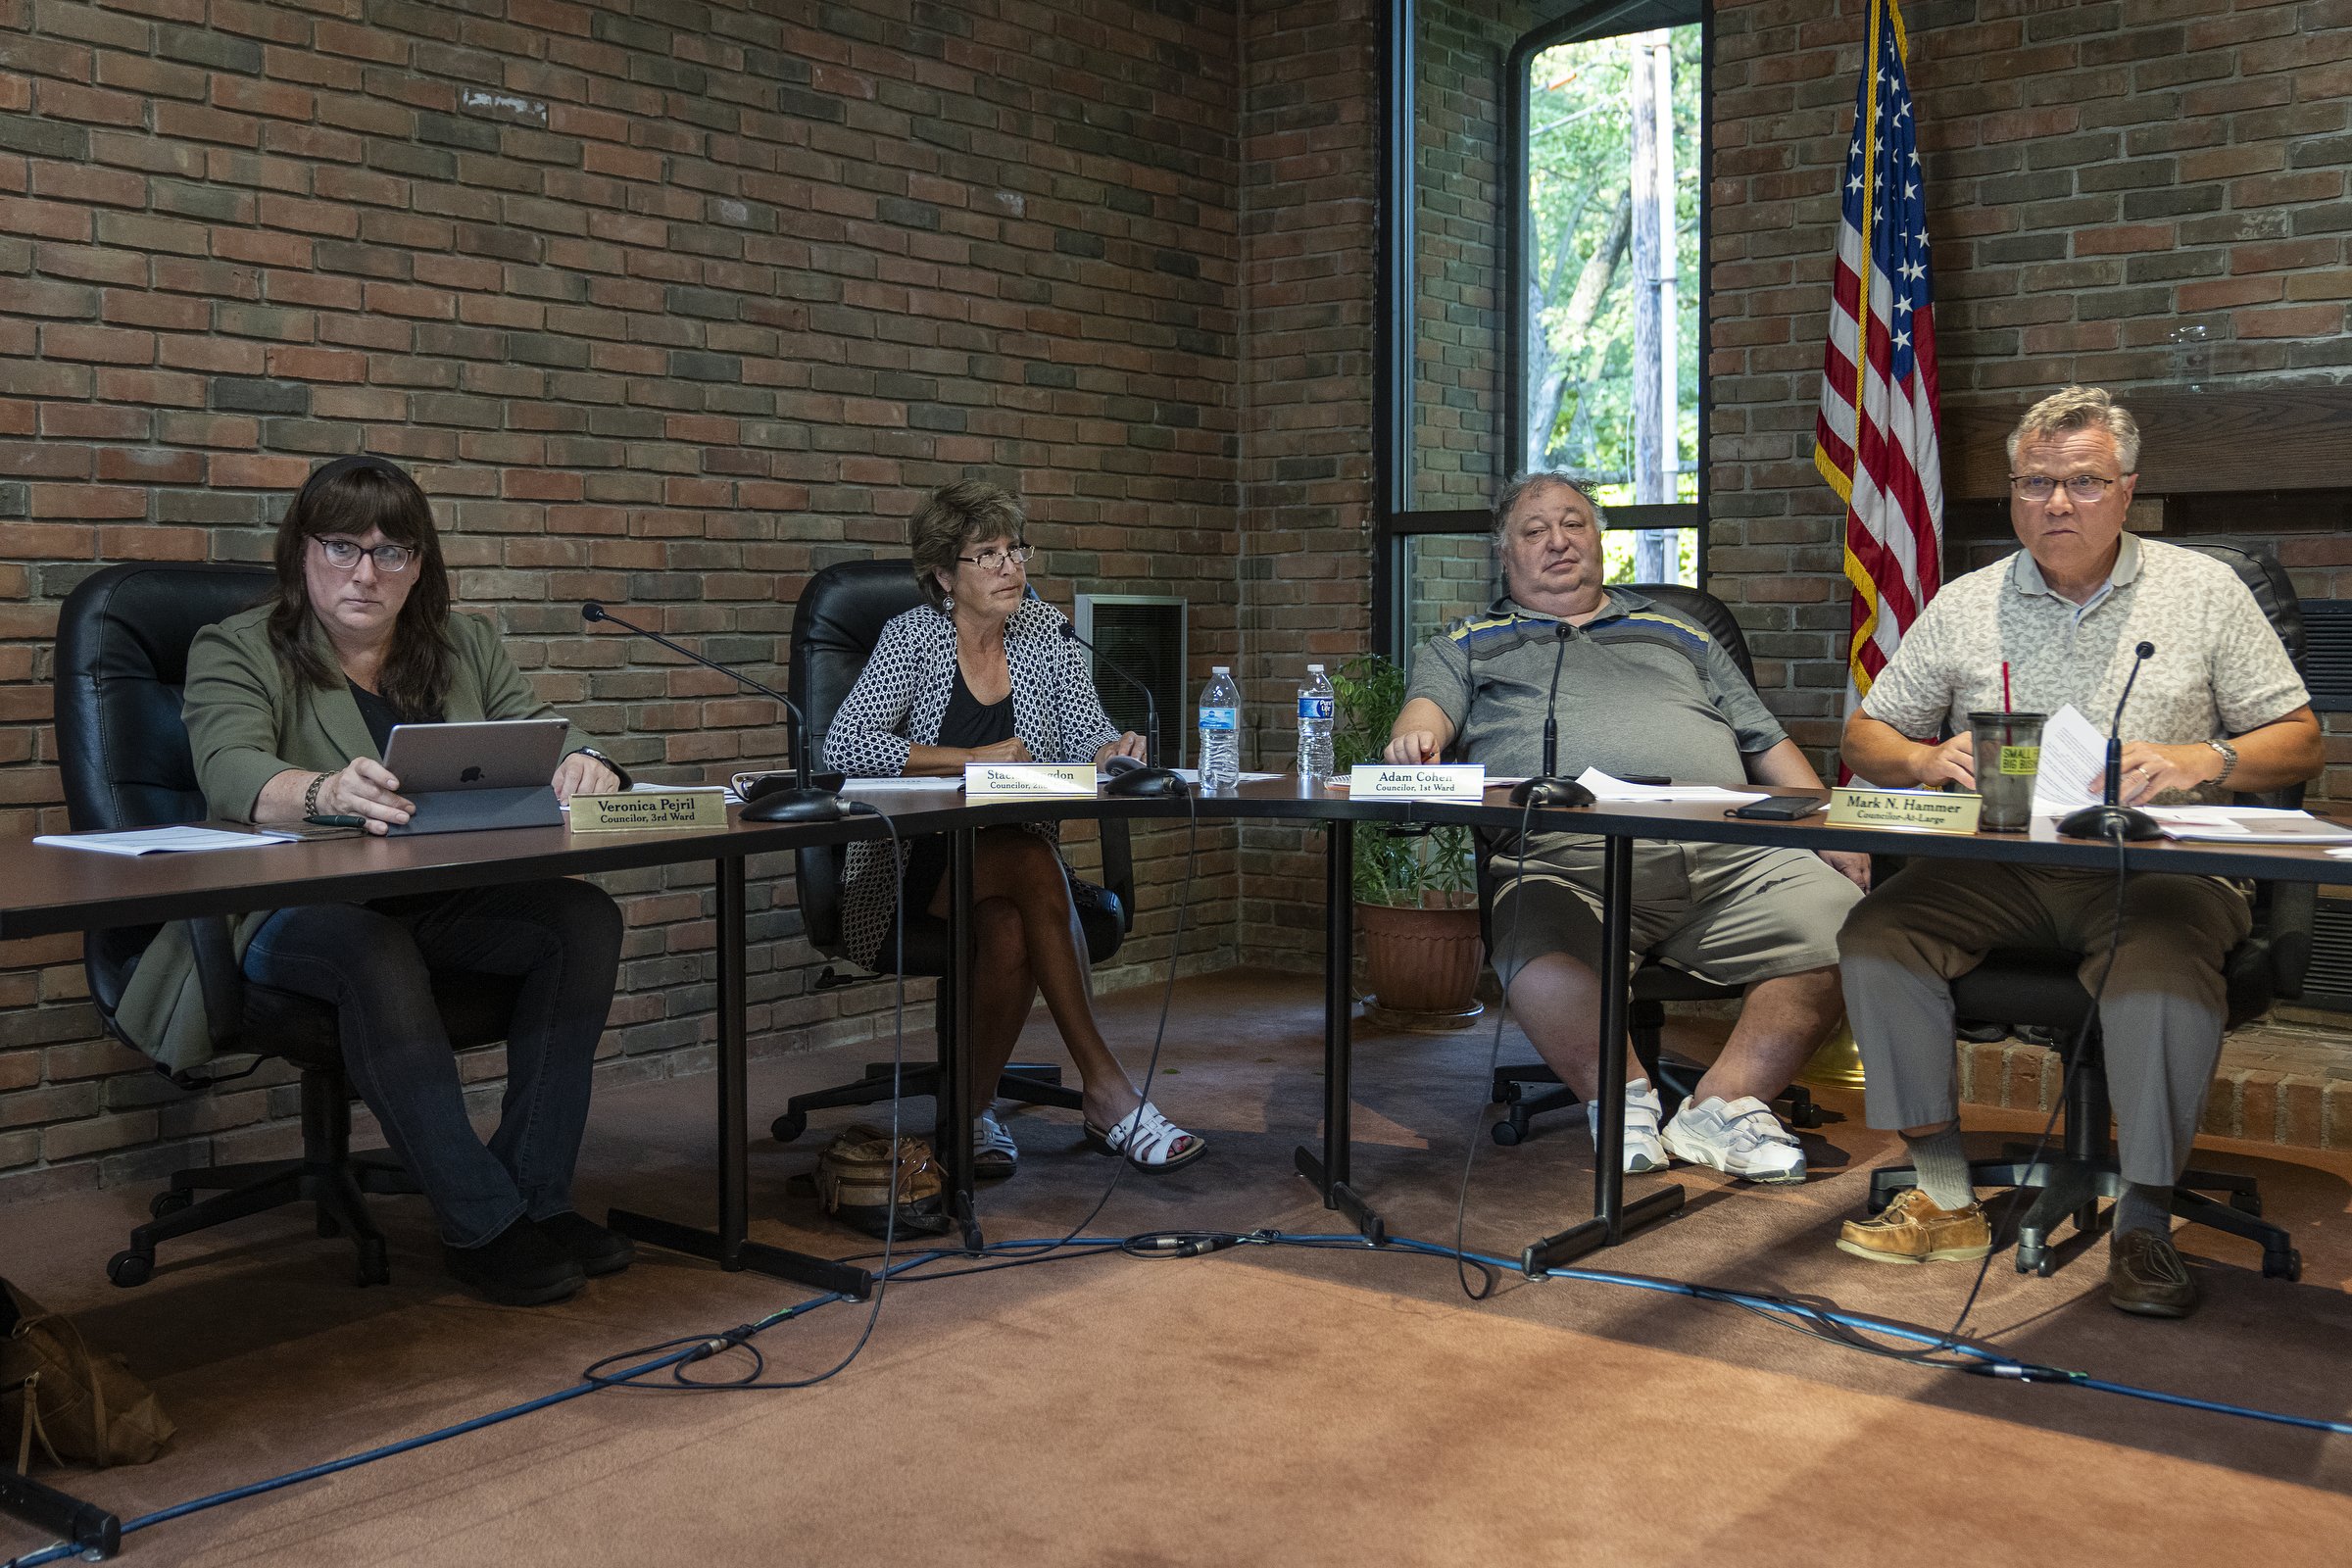  Veronica Pejril, left, a 58-year-old Greencastle city councilor, participates in a monthly council meeting on Thursday, Sept. 8, 2022. Pejril is Indiana's first openly transgender elected official. "I continue to play the long game with so many thin